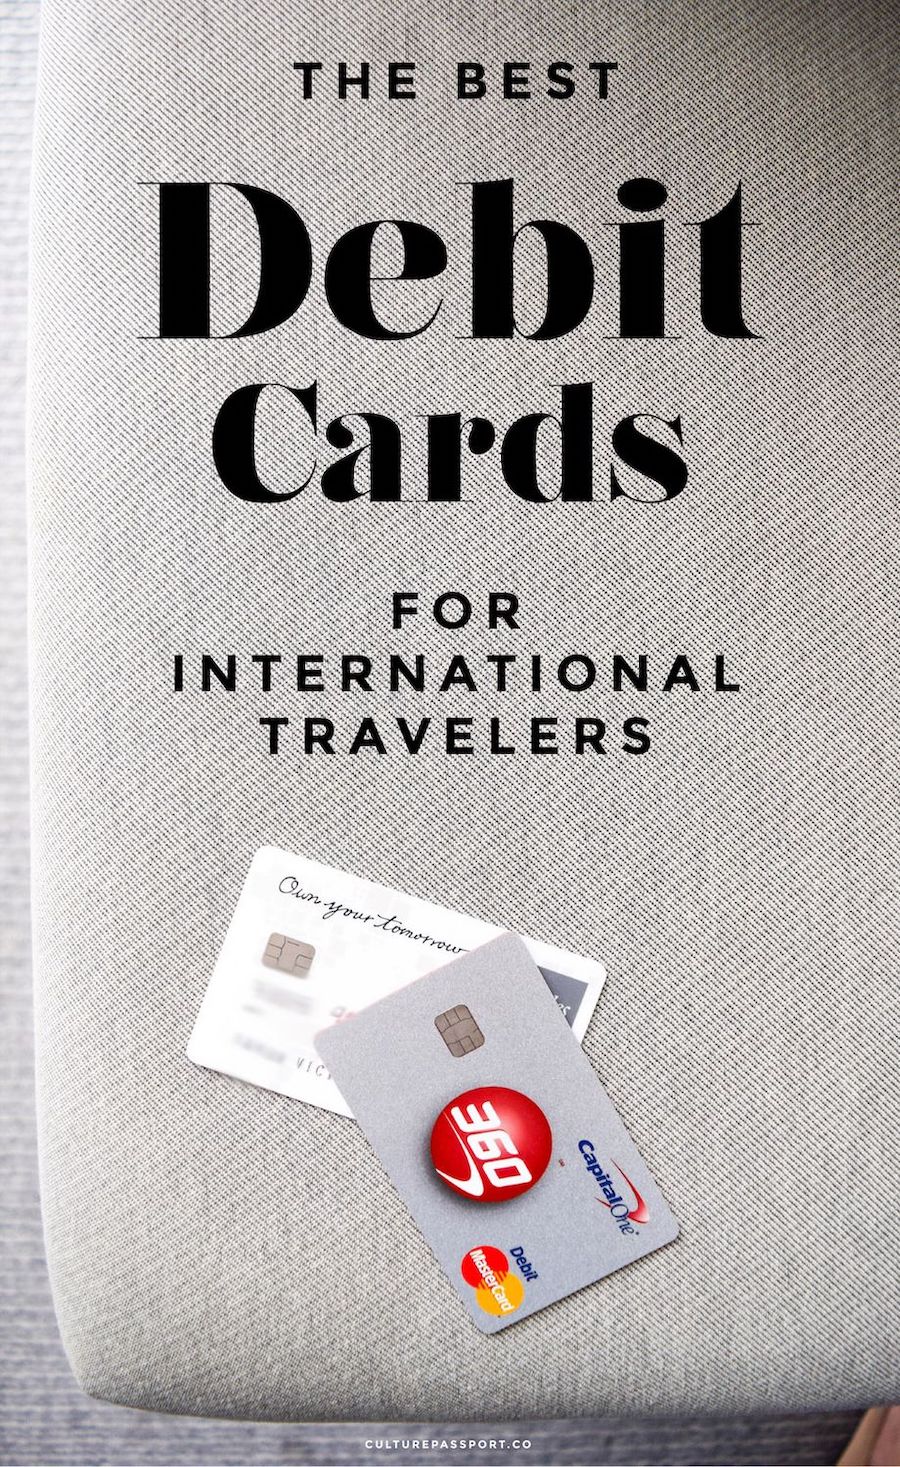 Best Debit Cards for International American Travelers - Save Money on Fees!